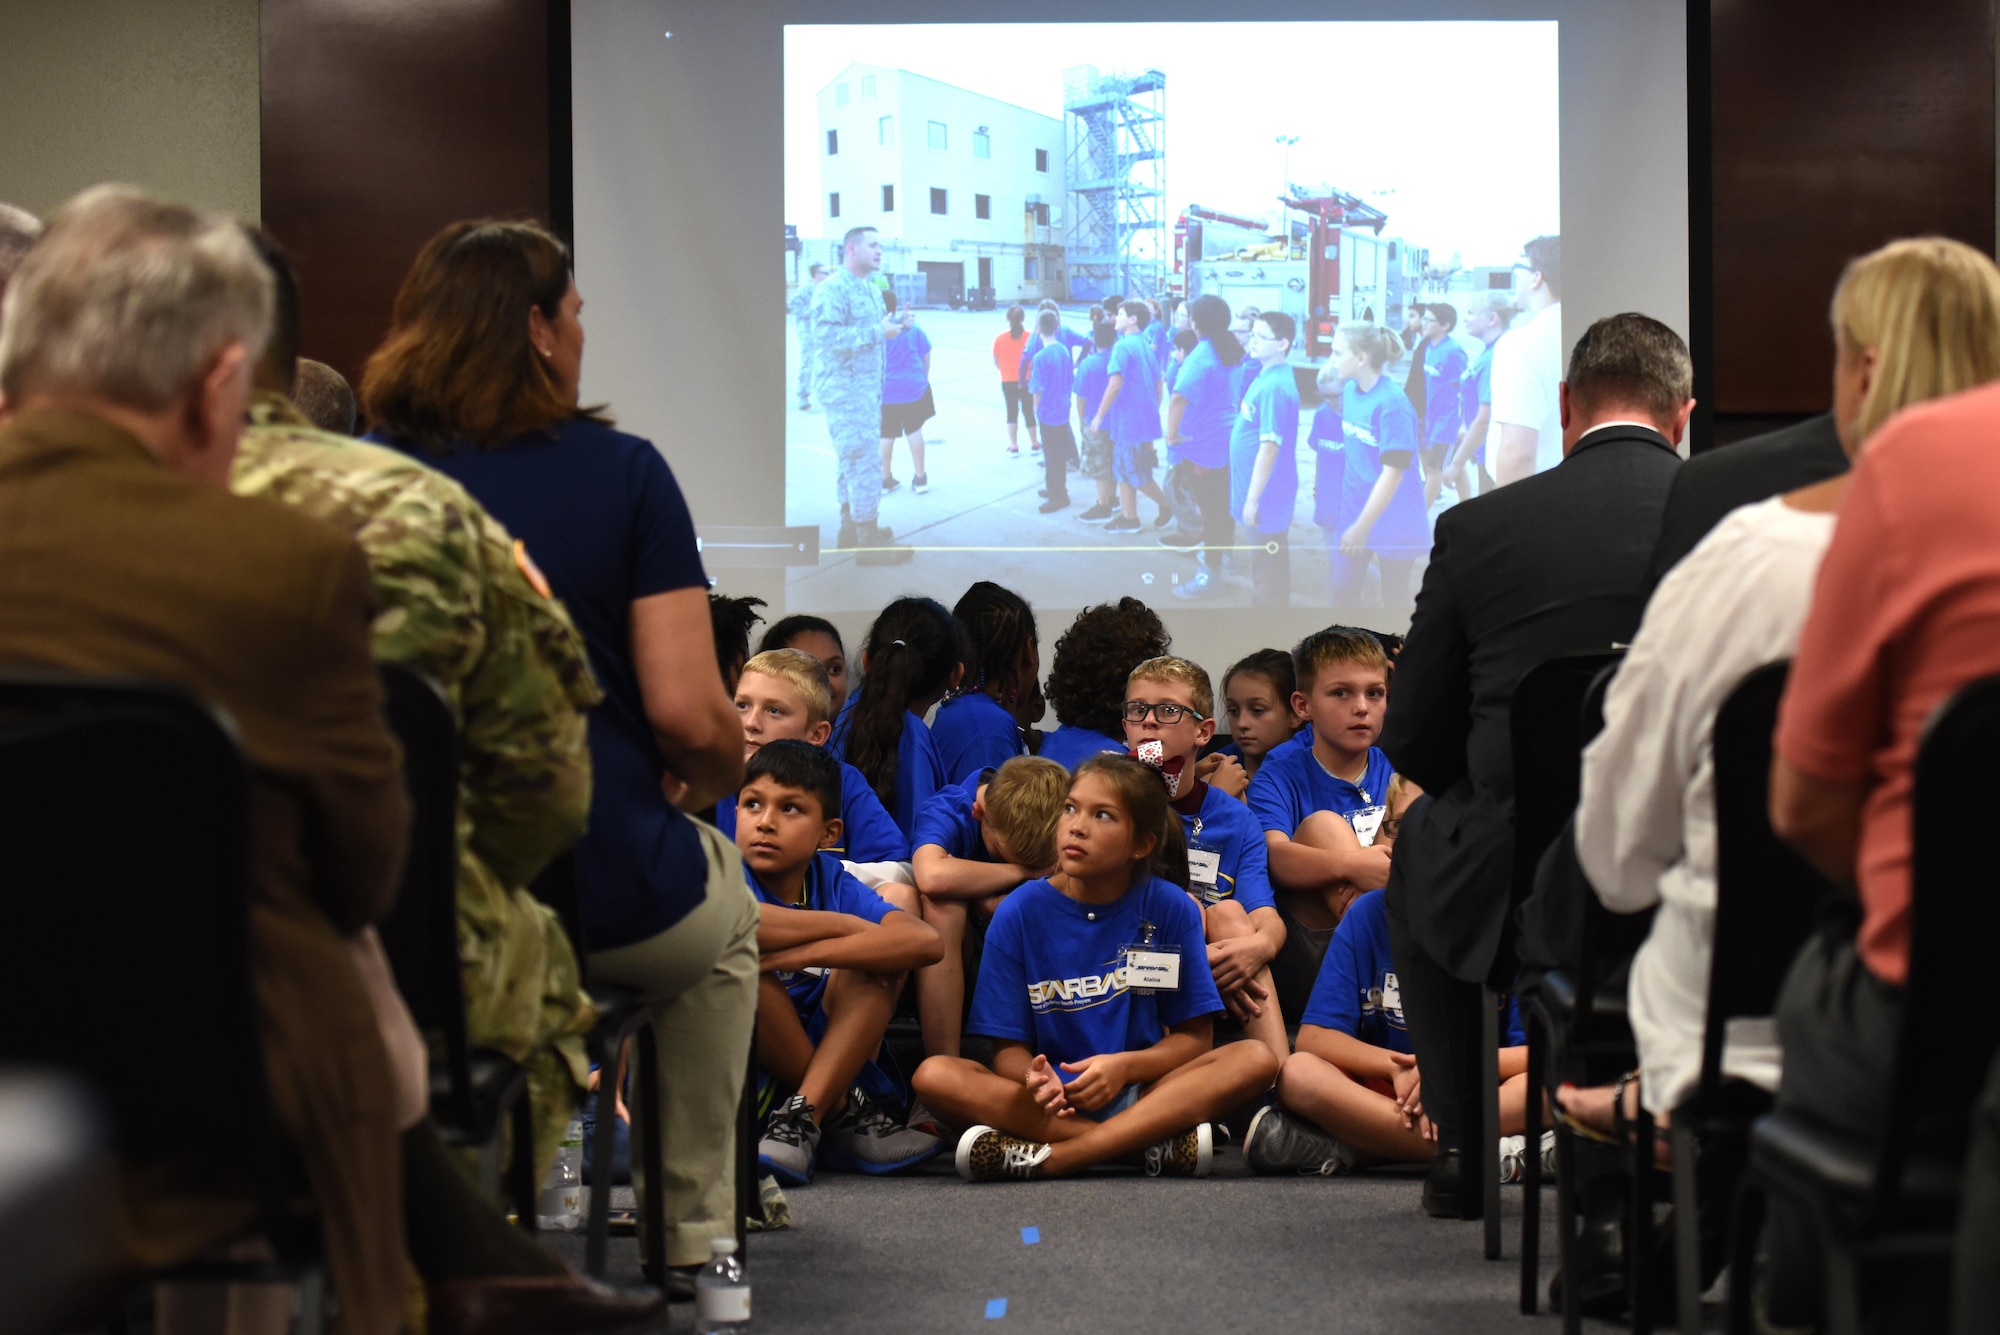 Students of STARBASE await the ribbon cutting ceremony at the STARBASE Goodfellow building on Goodfellow Air Force Base, Texas, Oct. 4, 2017. STARBASE, a Department of Defense program, teaches students science, technology, engineering and mathematics programs, showing them career possibilities for their future. (U.S. Air Force photo by Airman Zachary Chapman/Released)